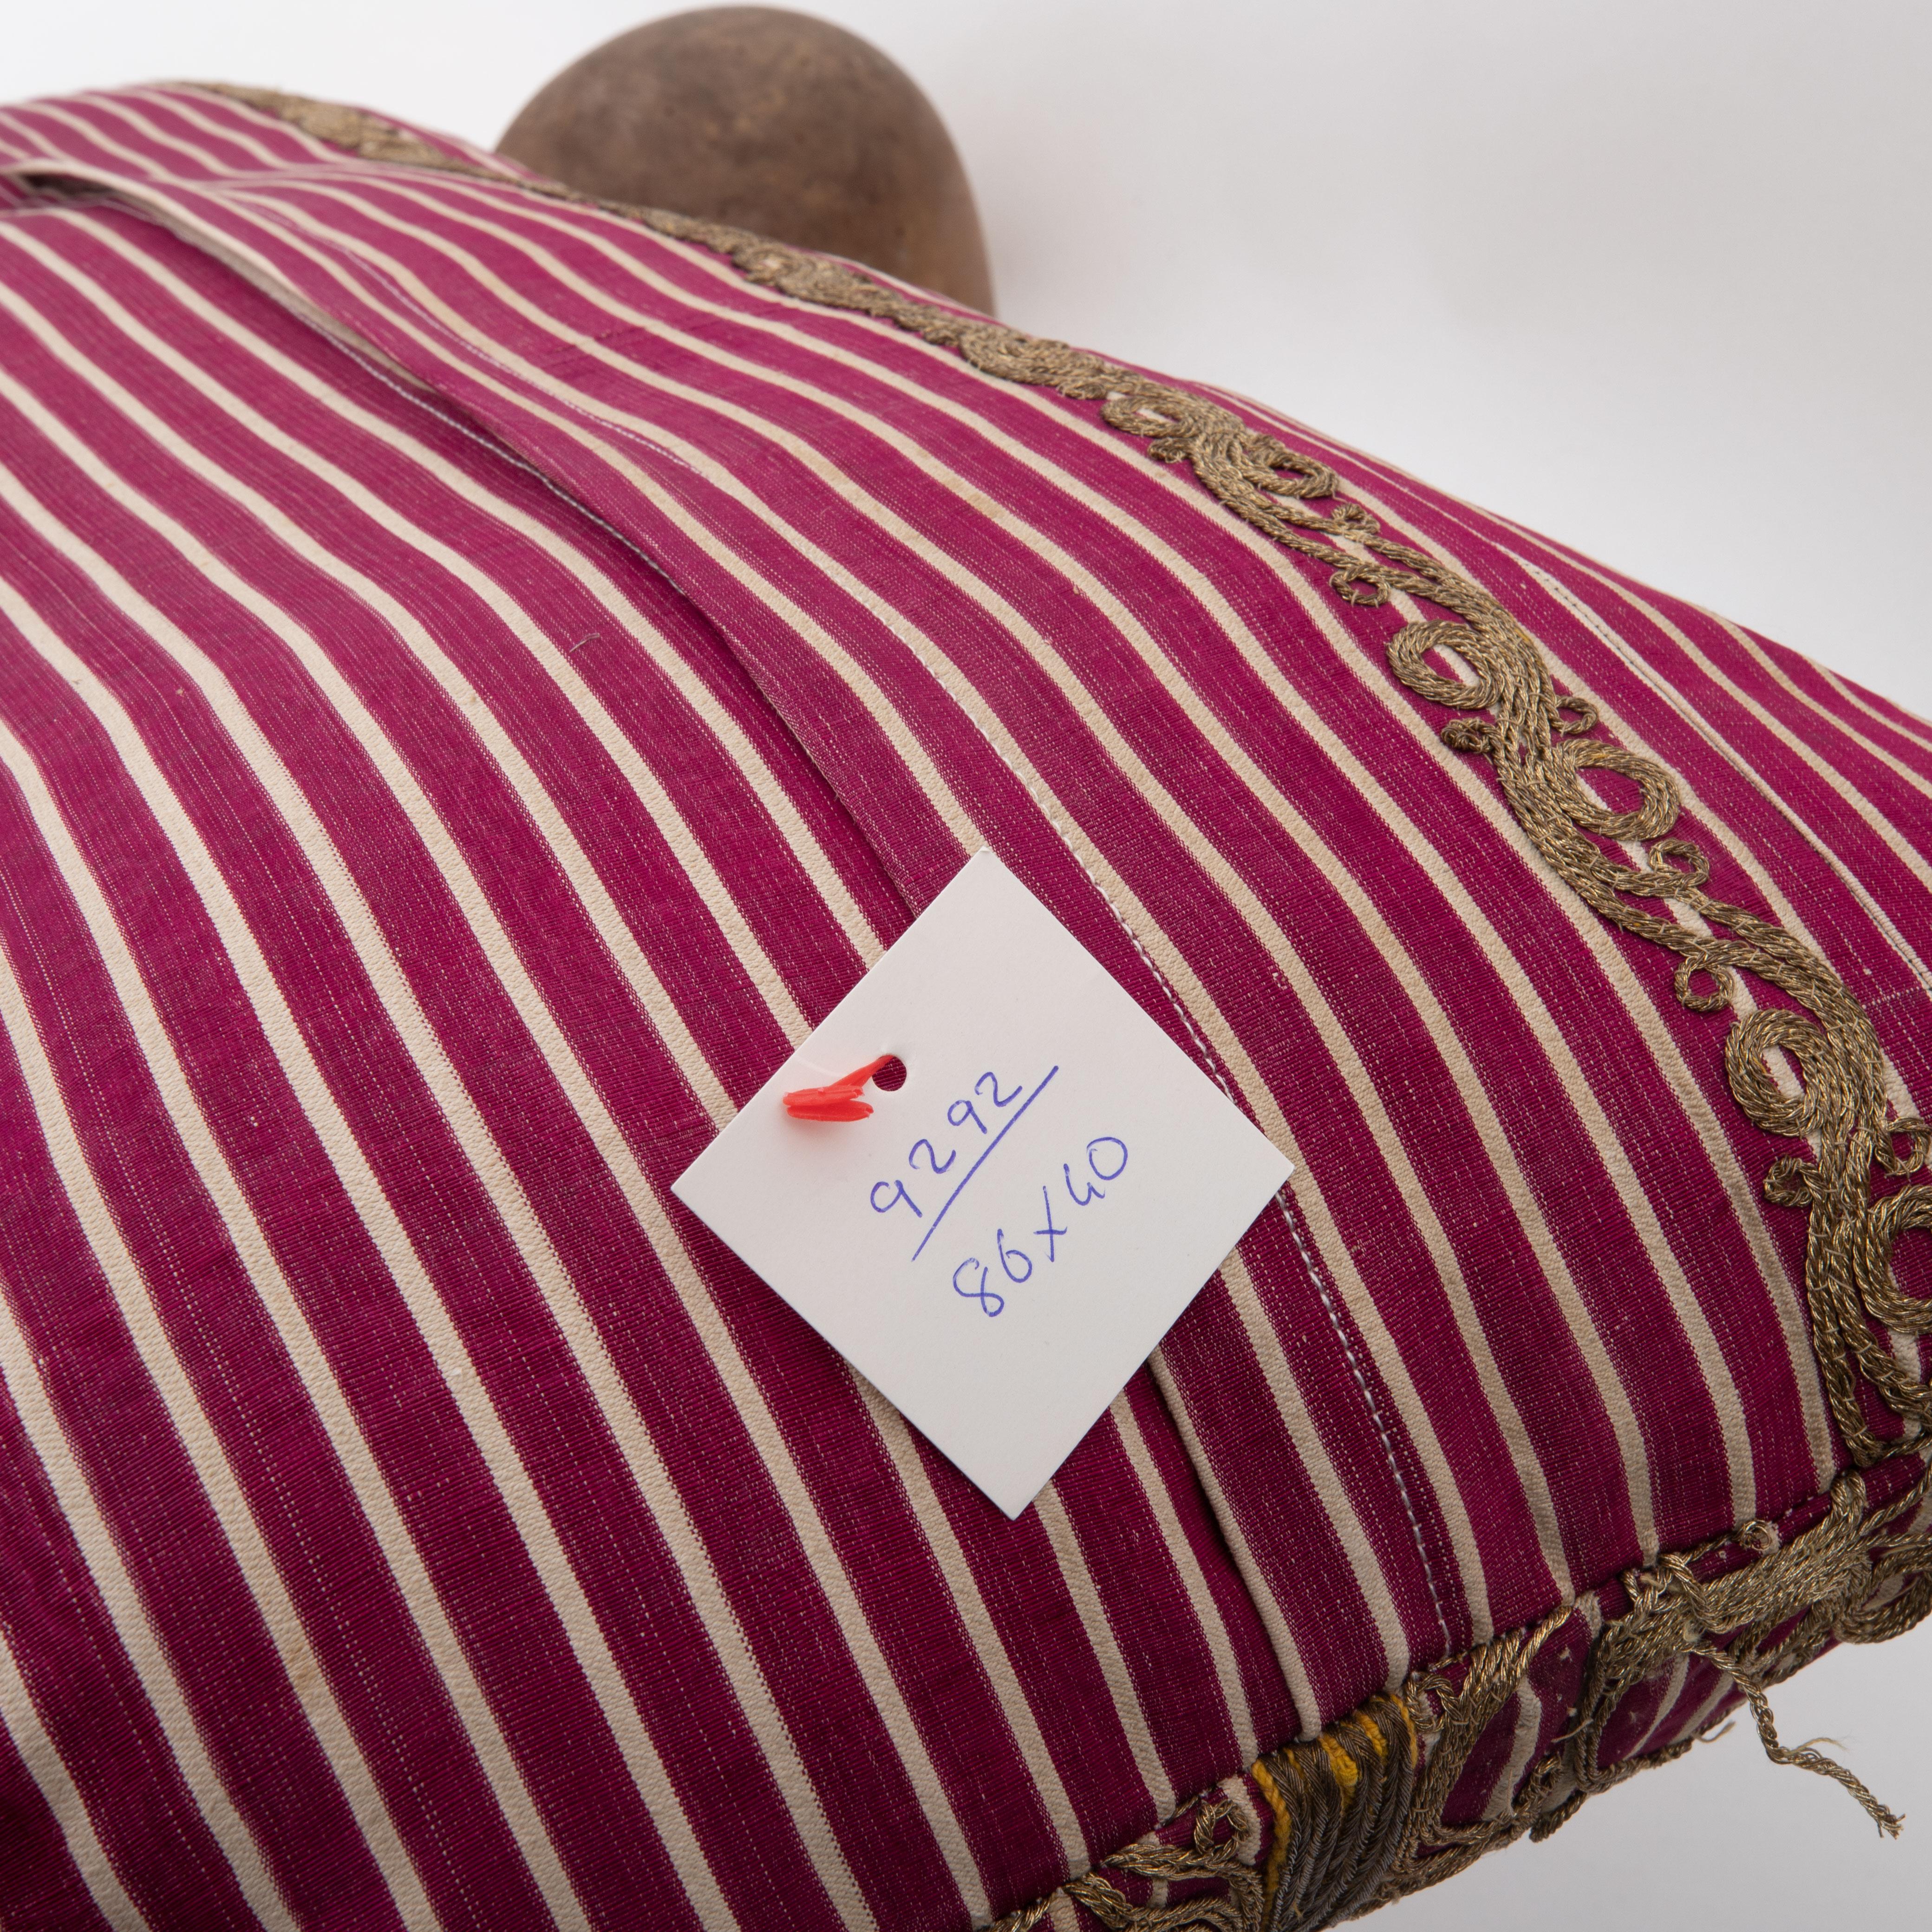 Antique Ottoman Turkish Pillow Case, Early 20th C. For Sale 1